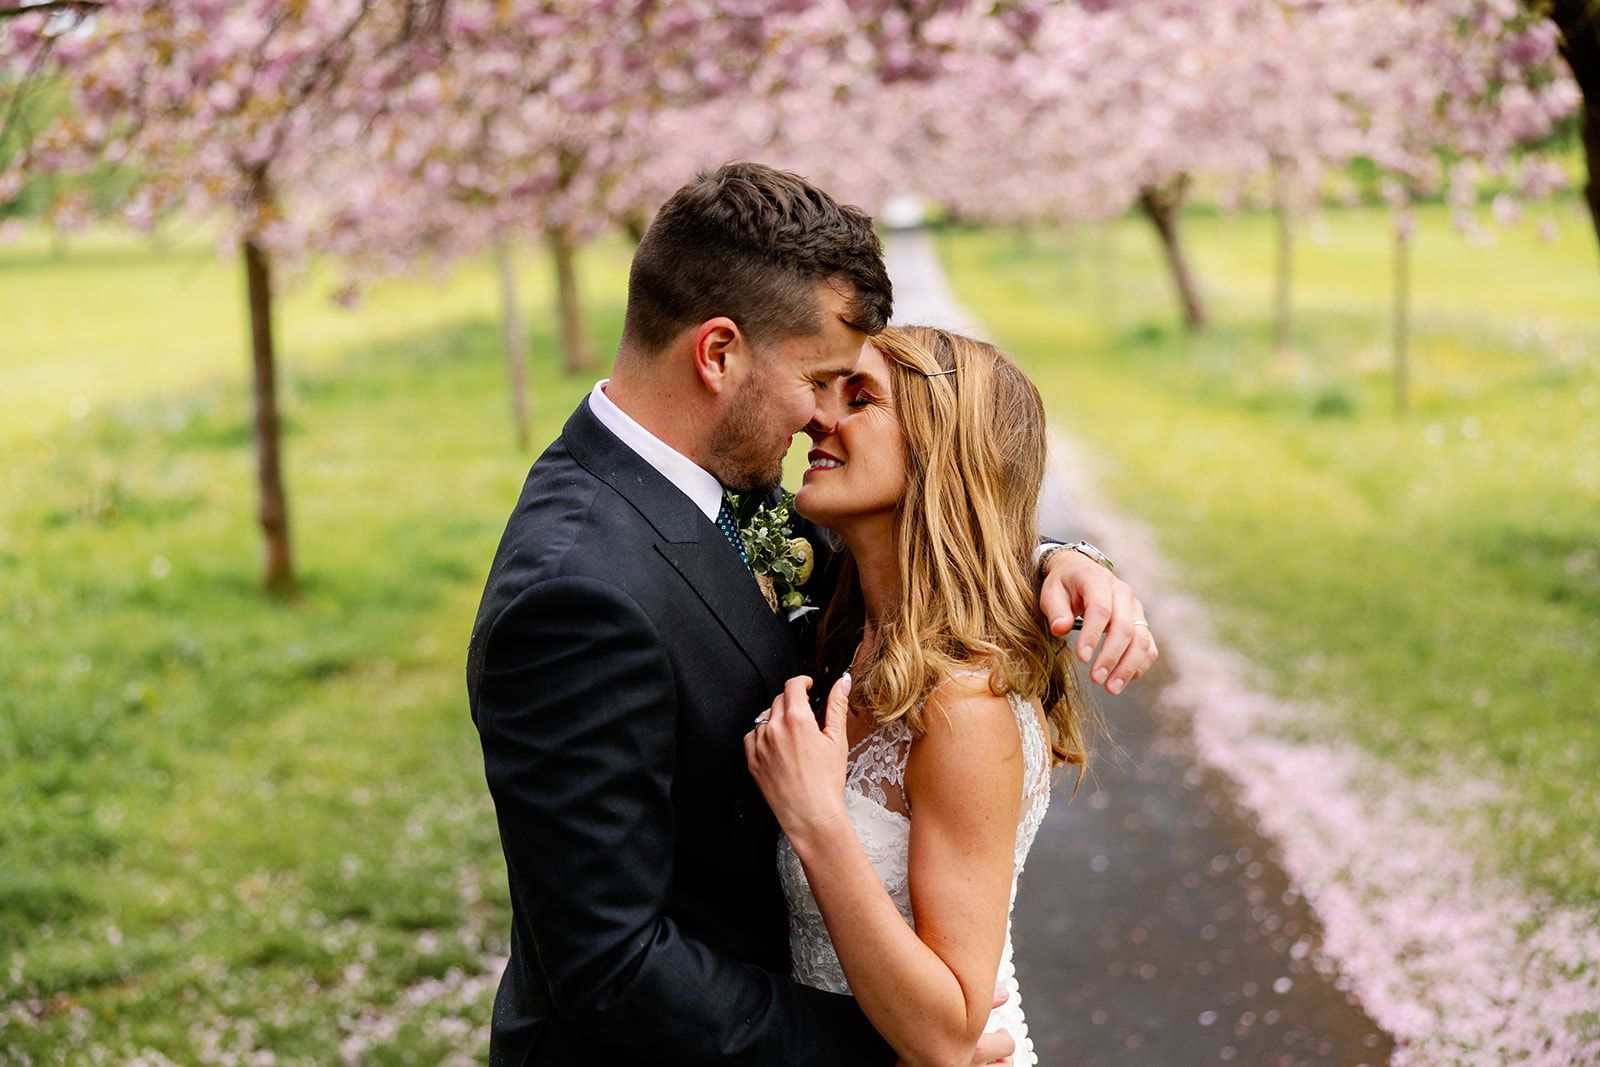 A very romantic picture of a bride and groom kissing under the cherry blossom 